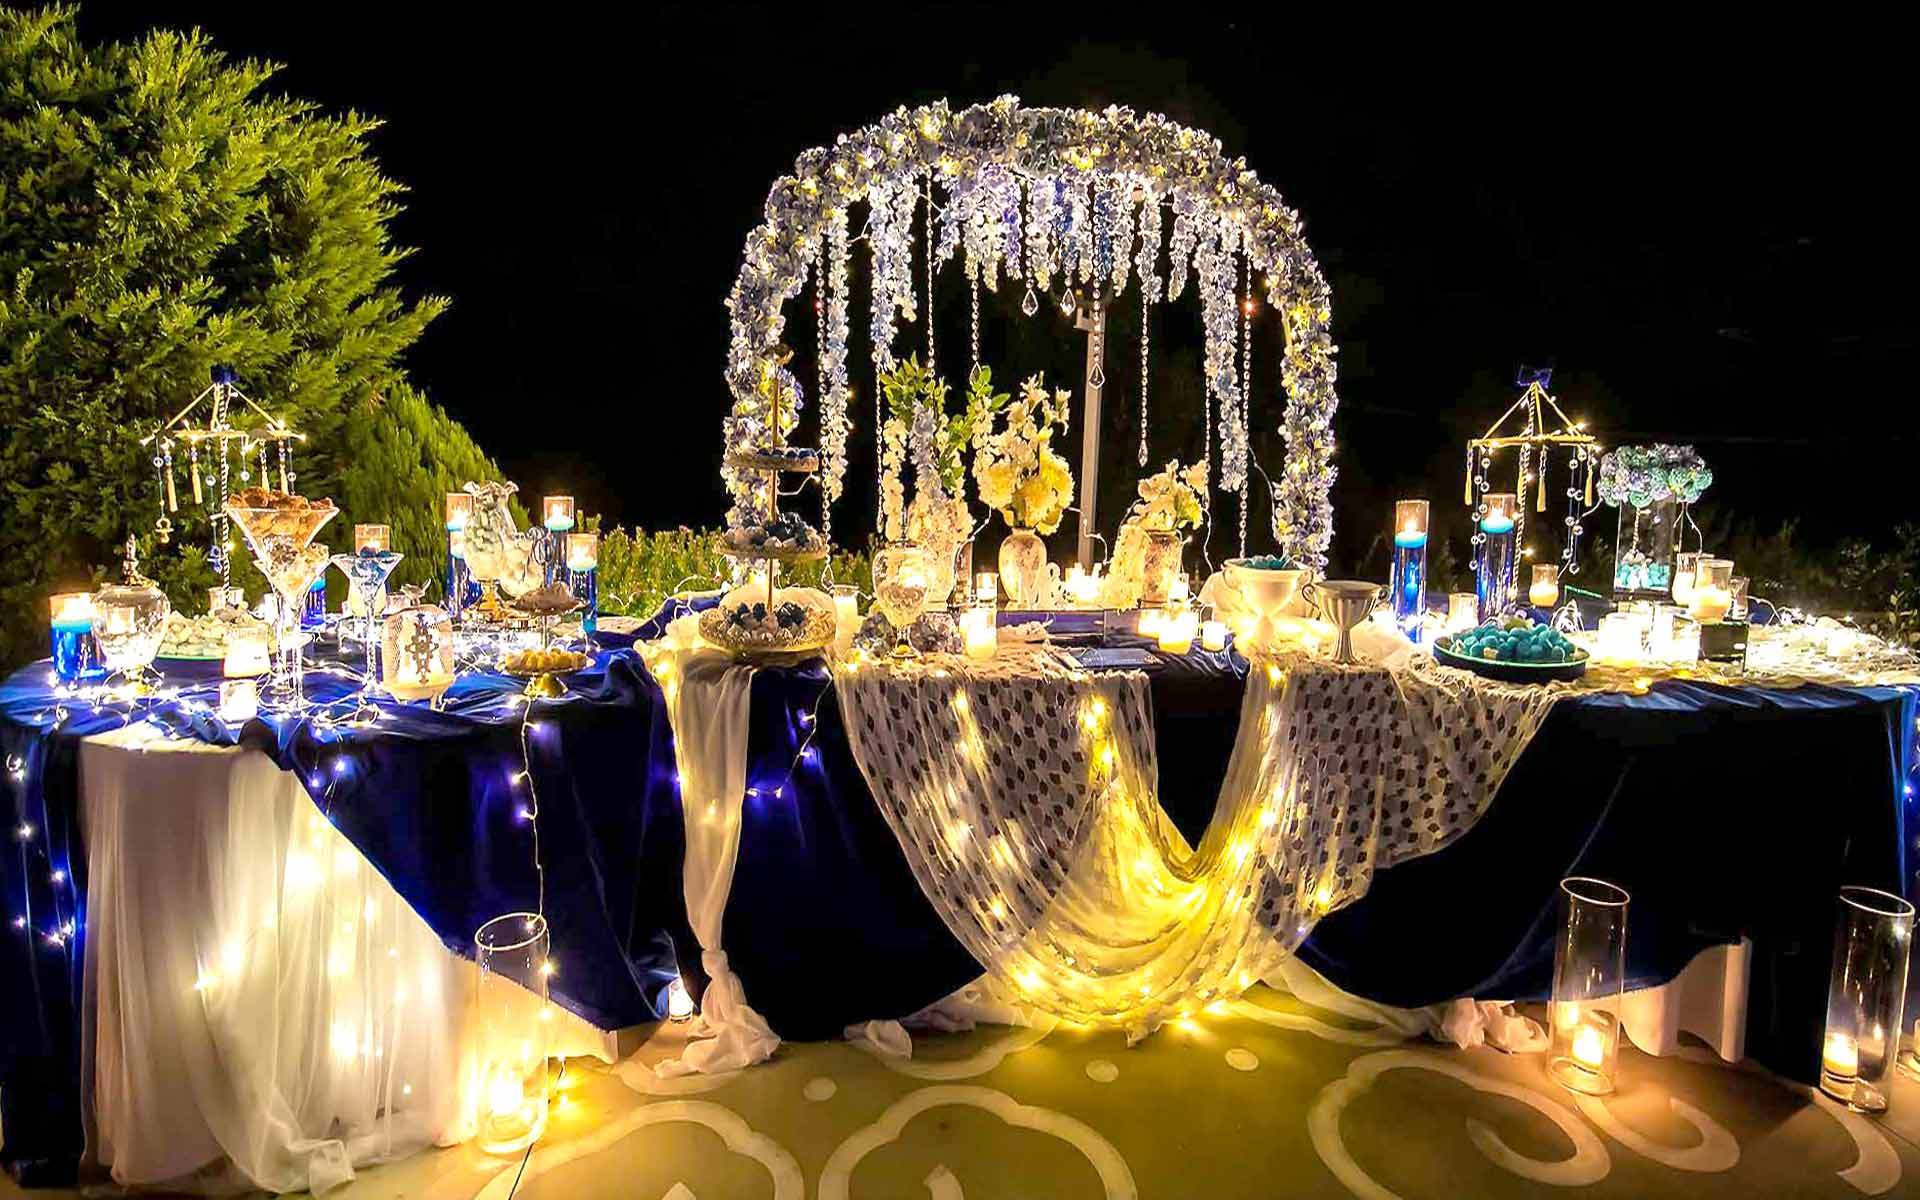 Incredible-Destination-Wedding-Guest-Book-table-with-stunning-decor-in-blue-and-white